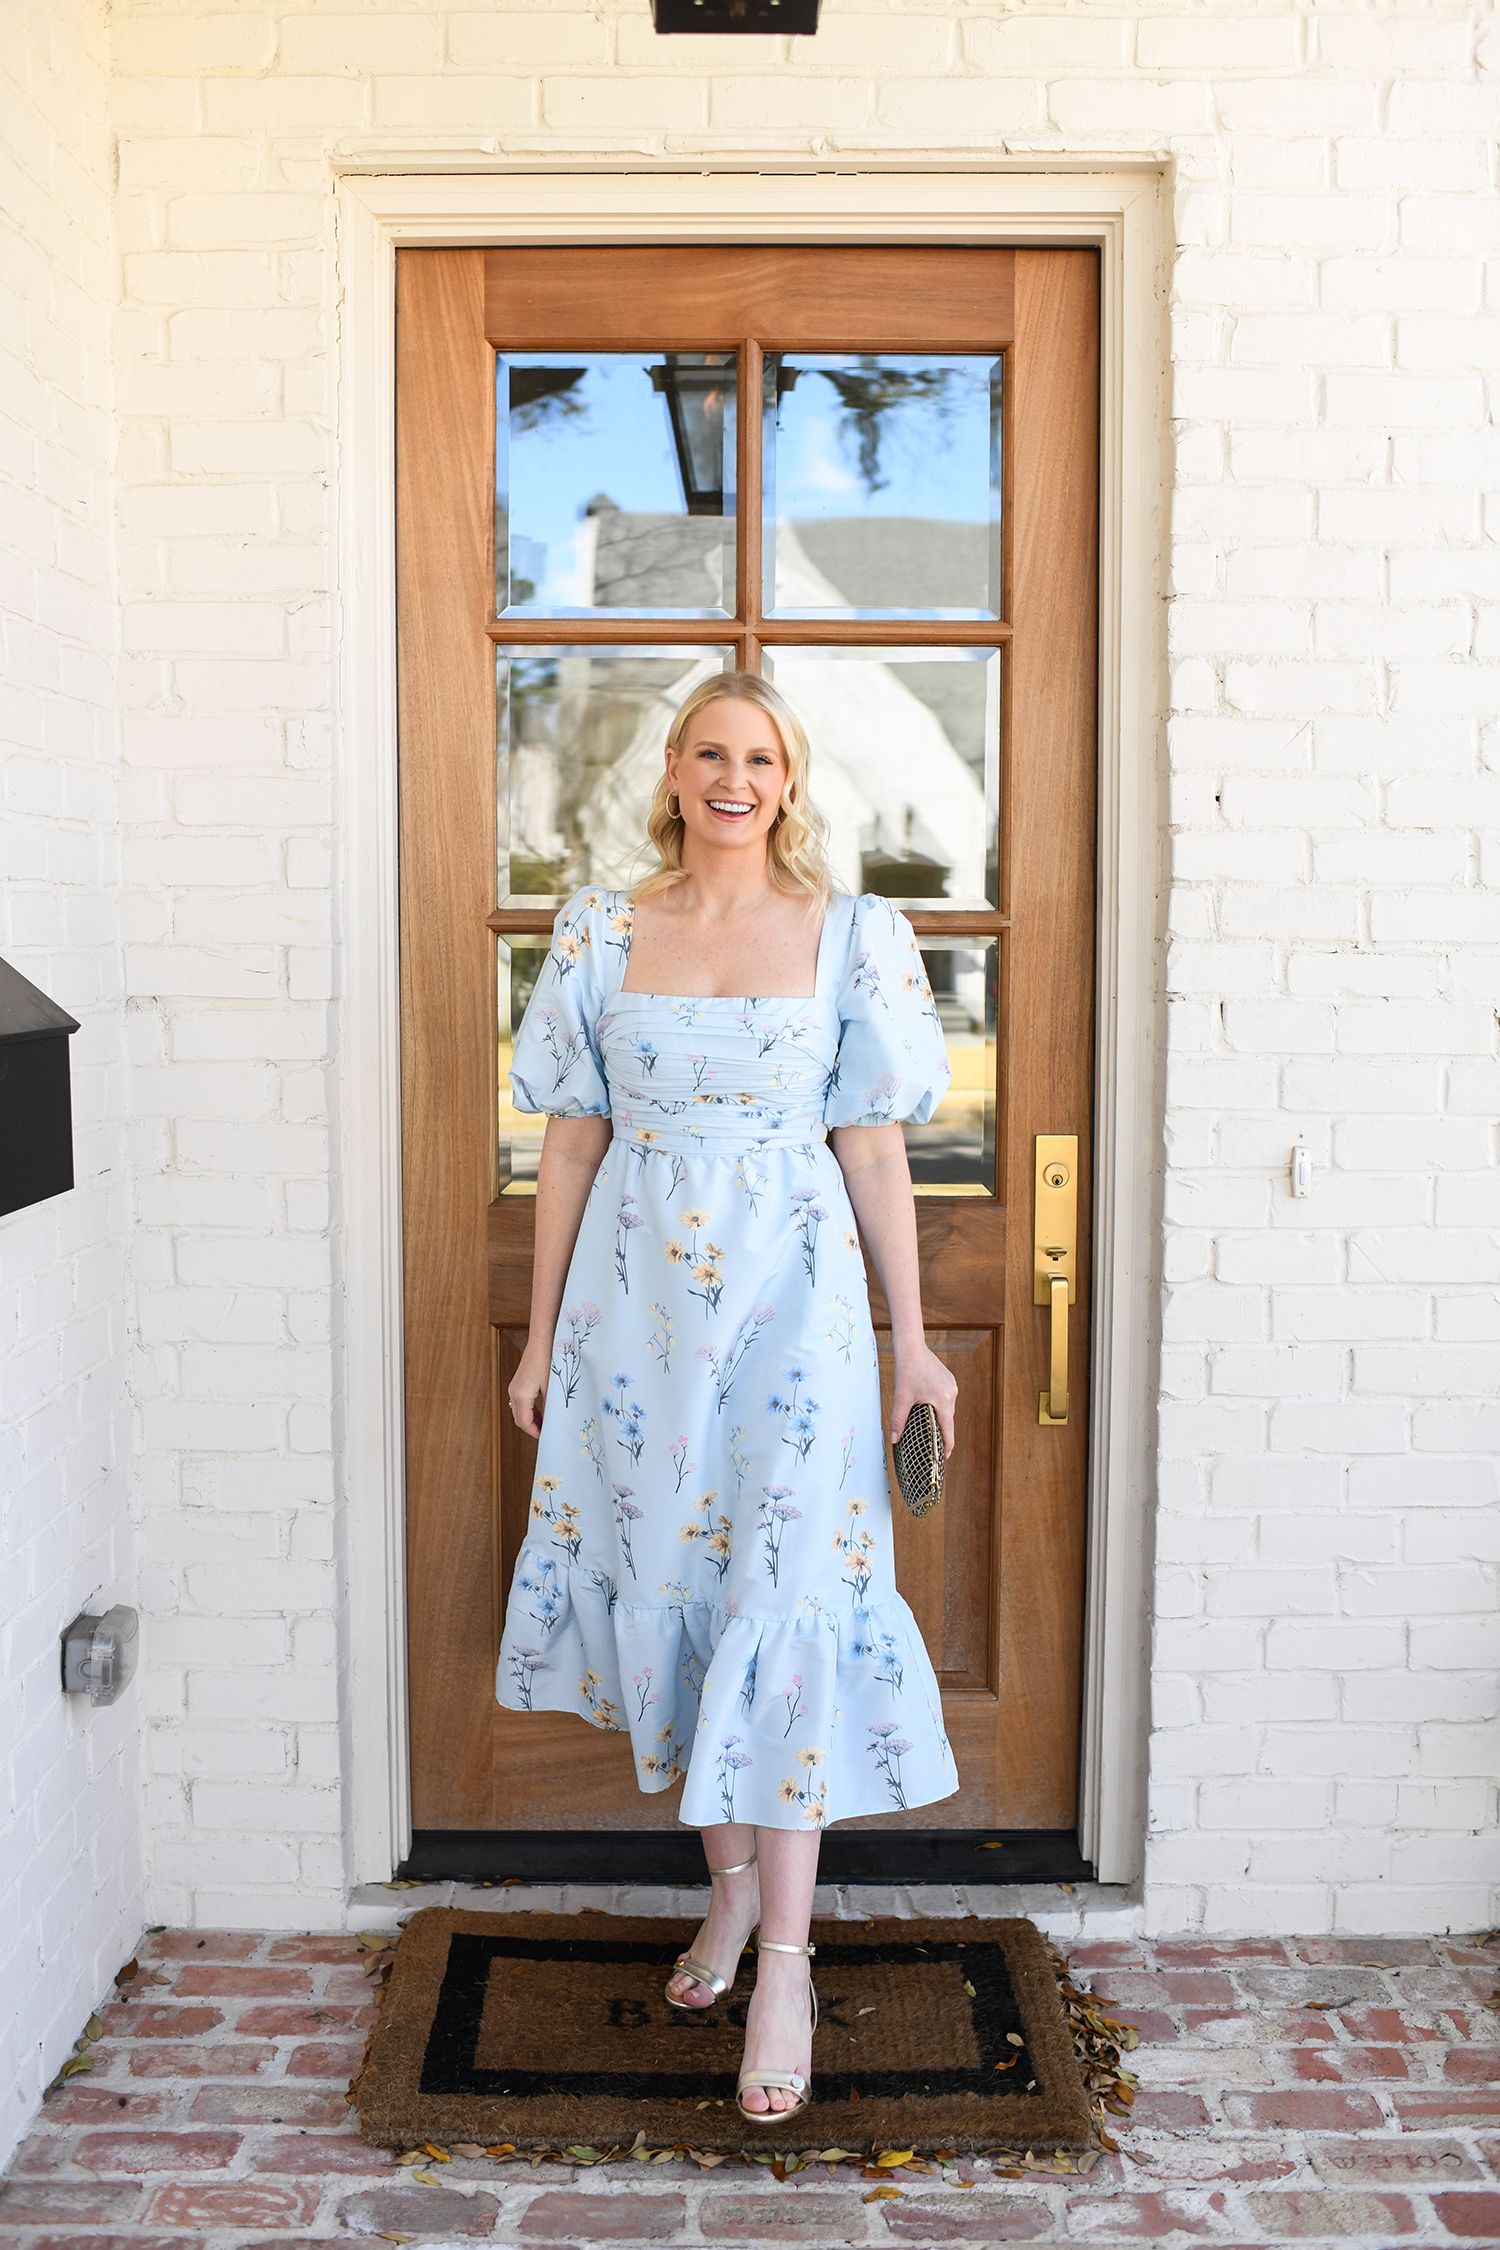 SPRING/SUMMER WEDDING GUEST DRESSES ROUND TWO